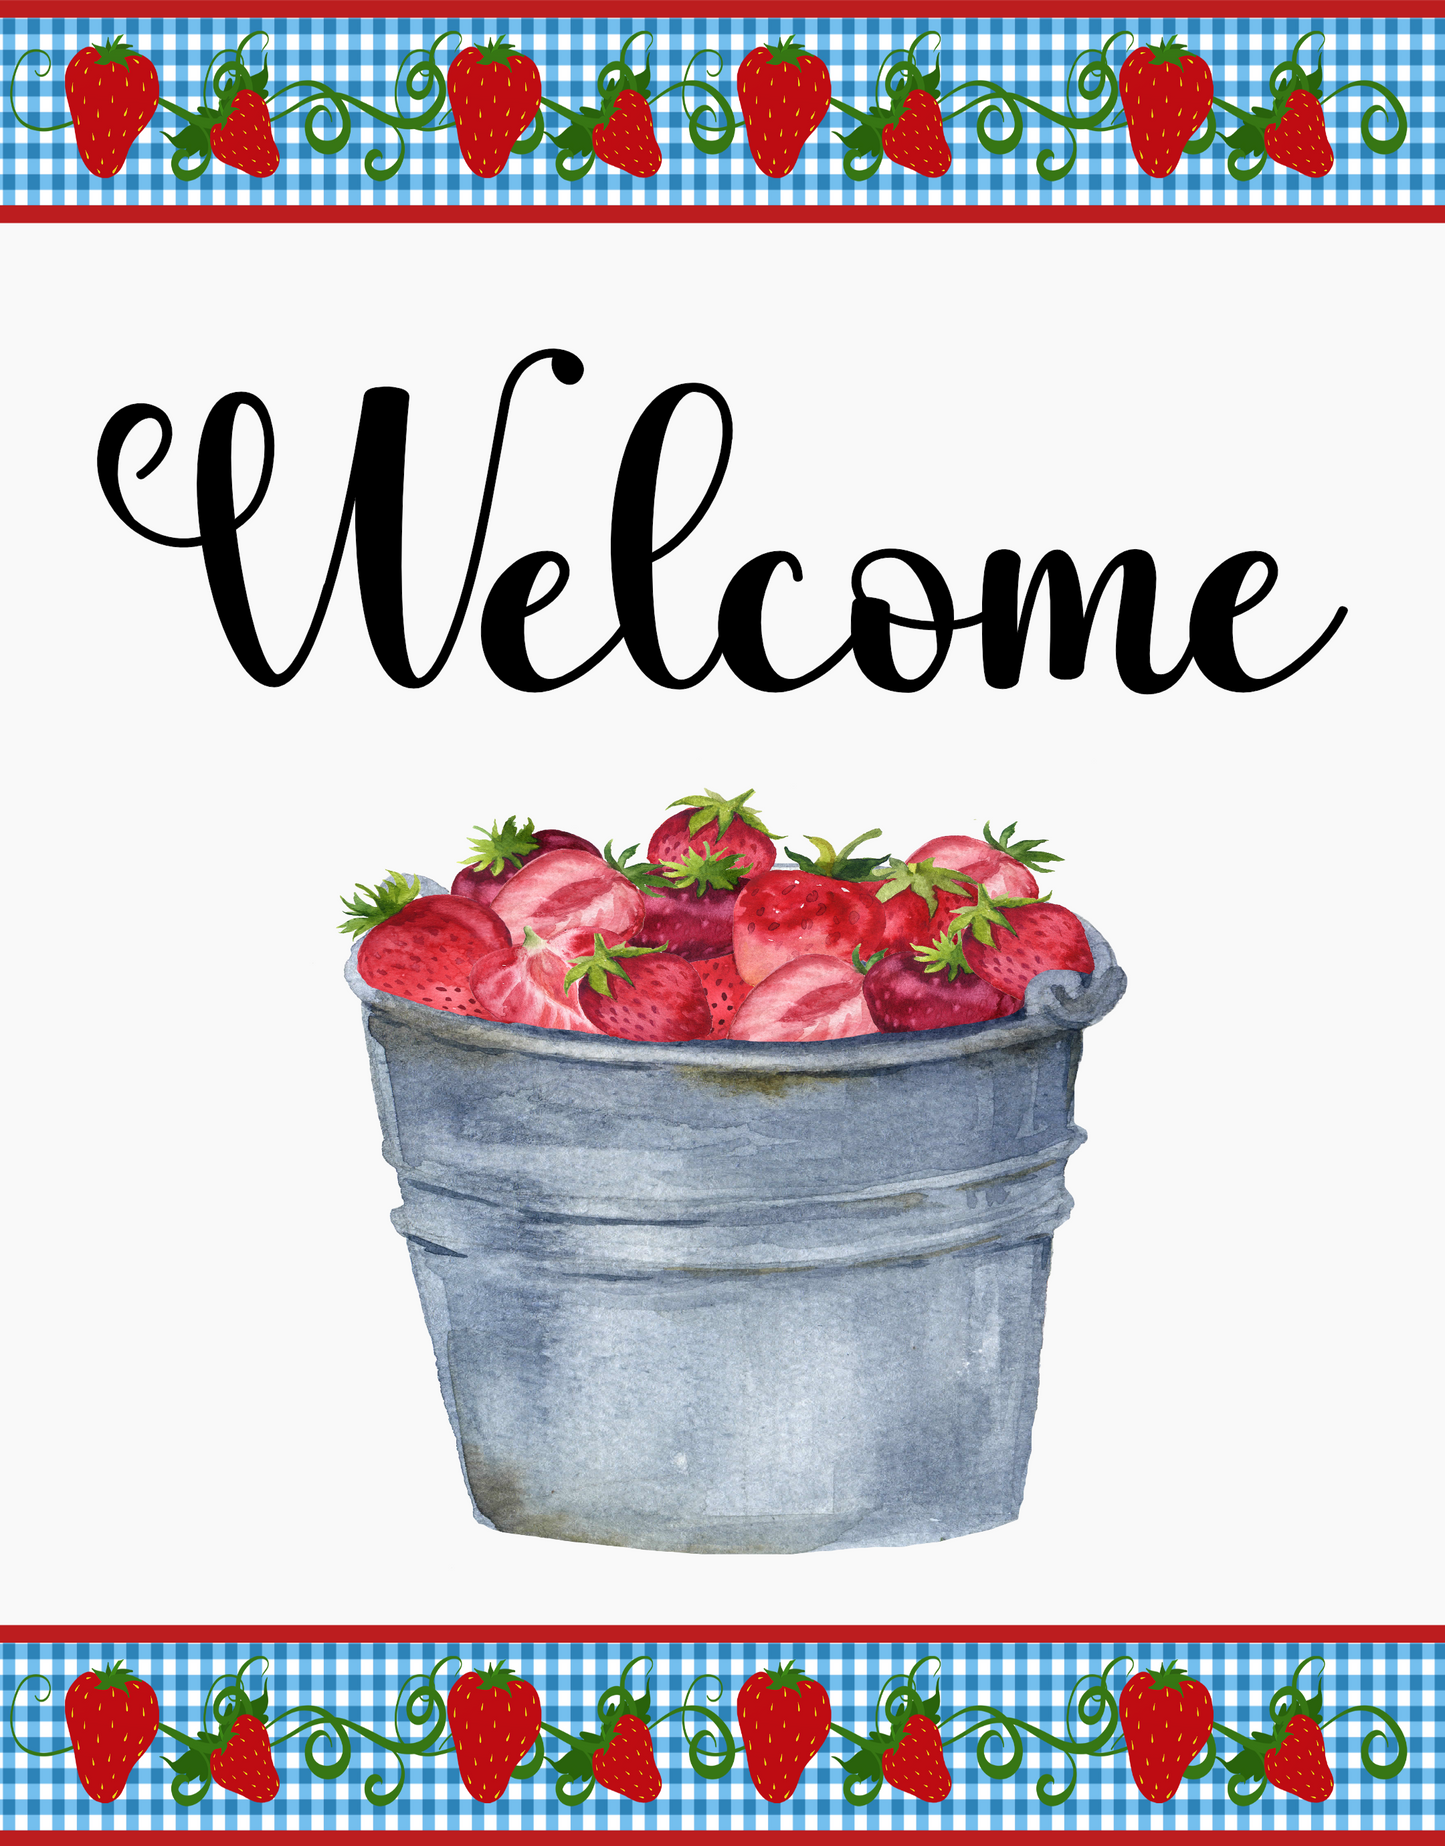 Welcome Strawberries 7x9